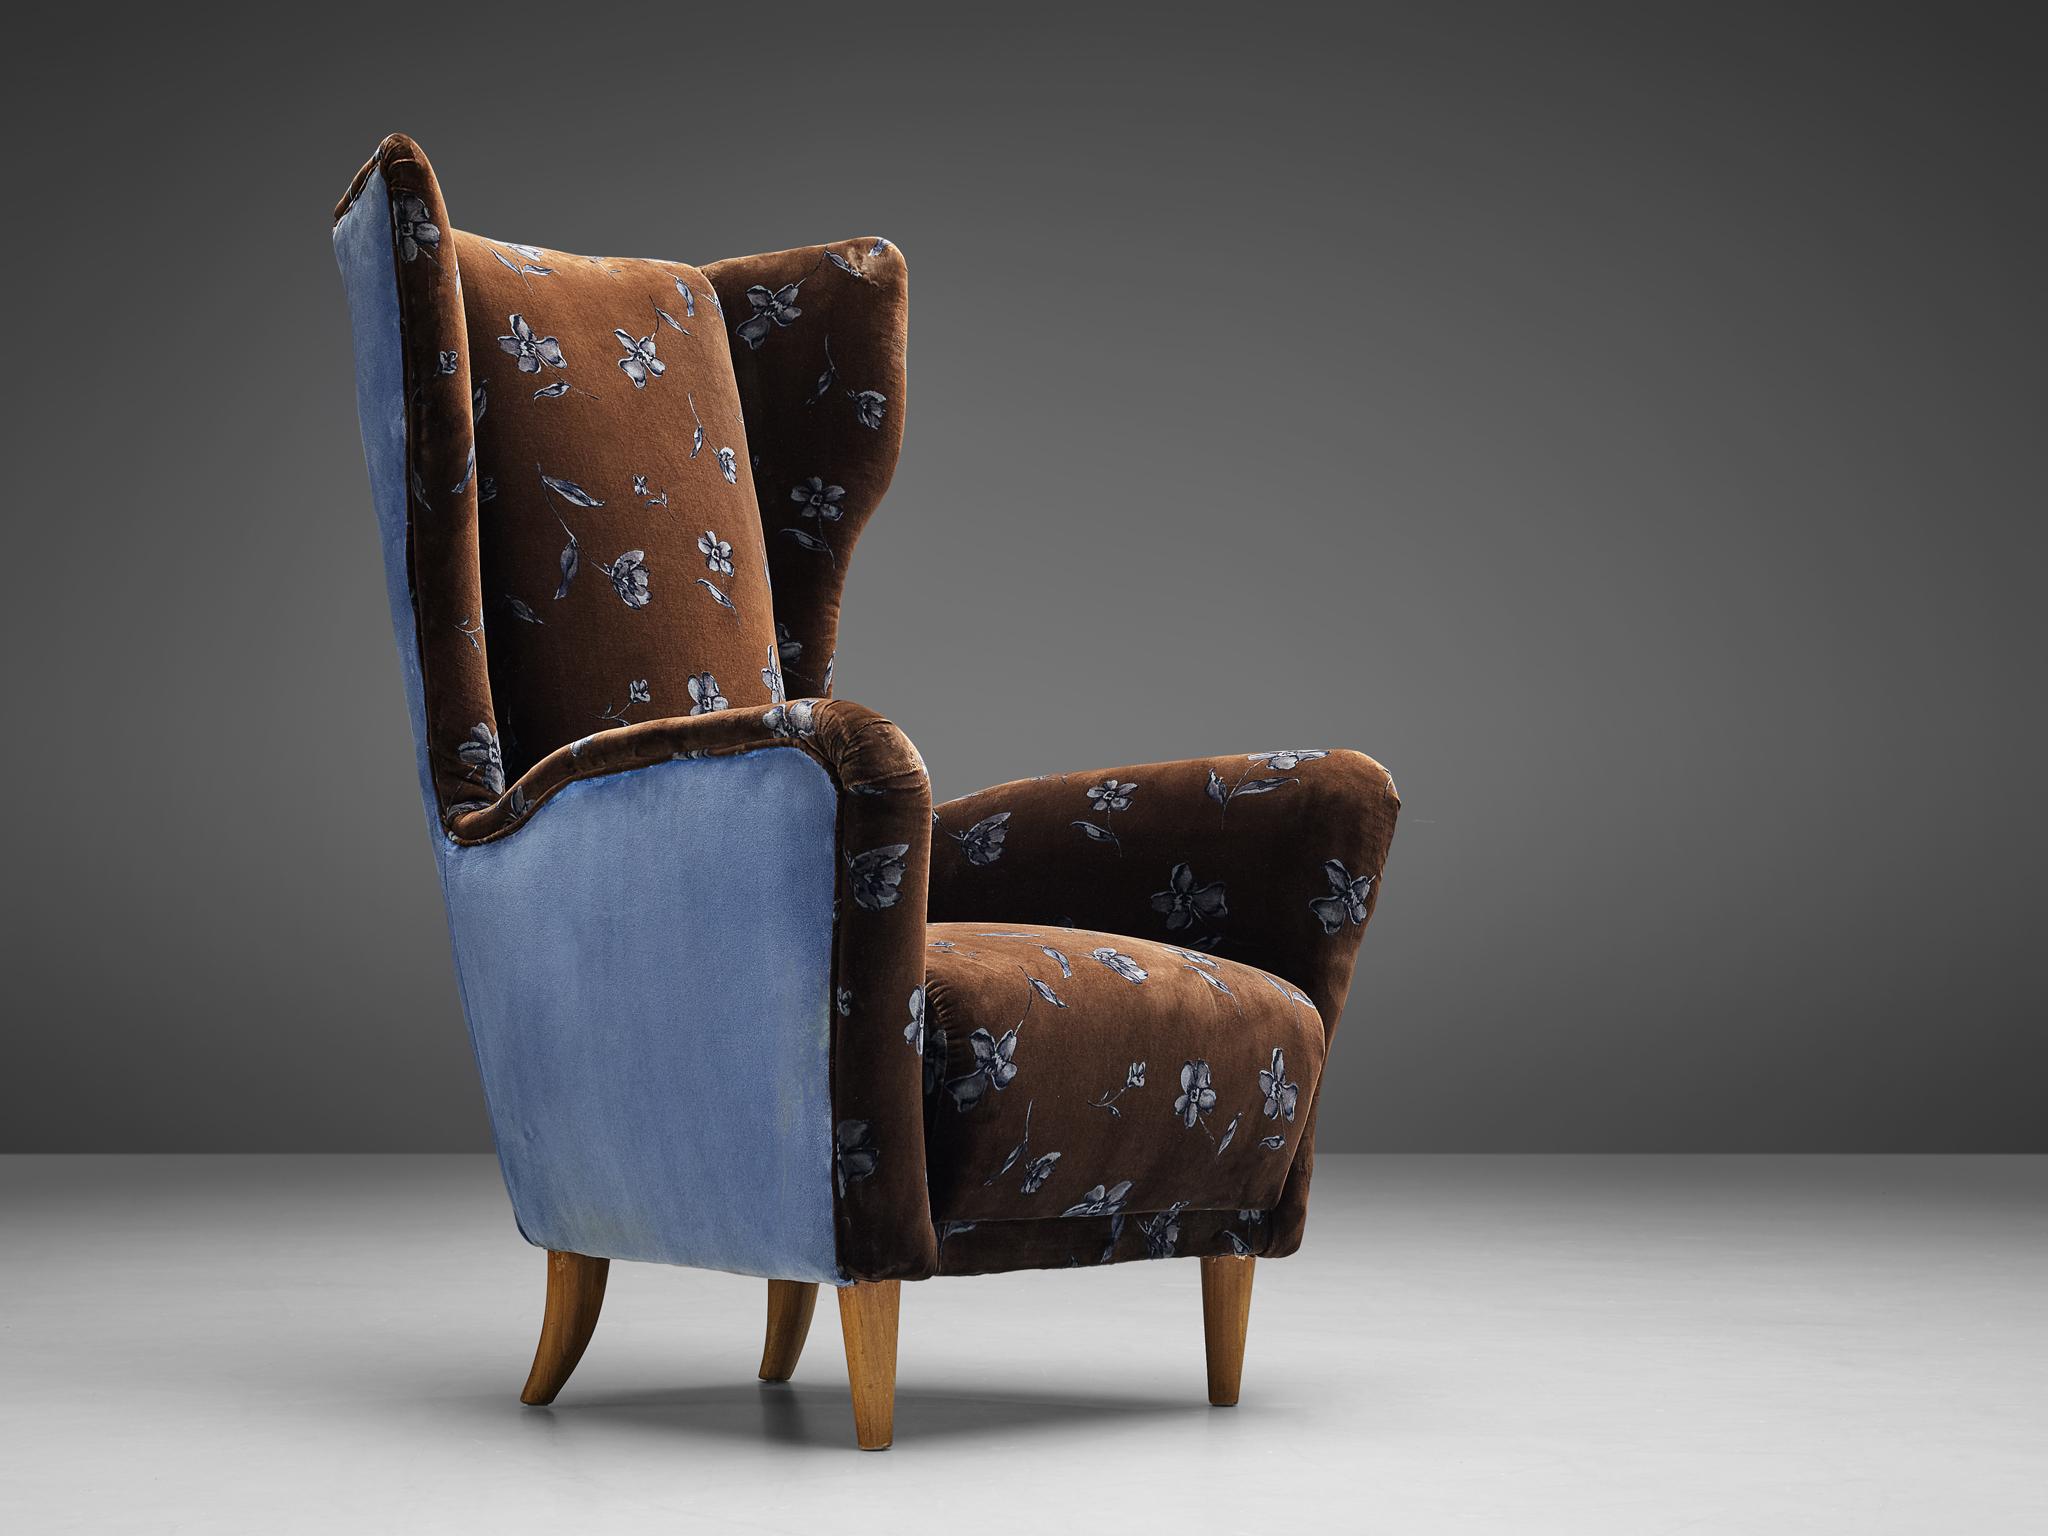 Italian lounge chair, patterned upholstery, wood, Italy, 1960s

This Italian postwar wingback chair has an high back and gracious wings. The elegant armrests are slightly curved outwards and the seat is equipped with delicate tapered legs.